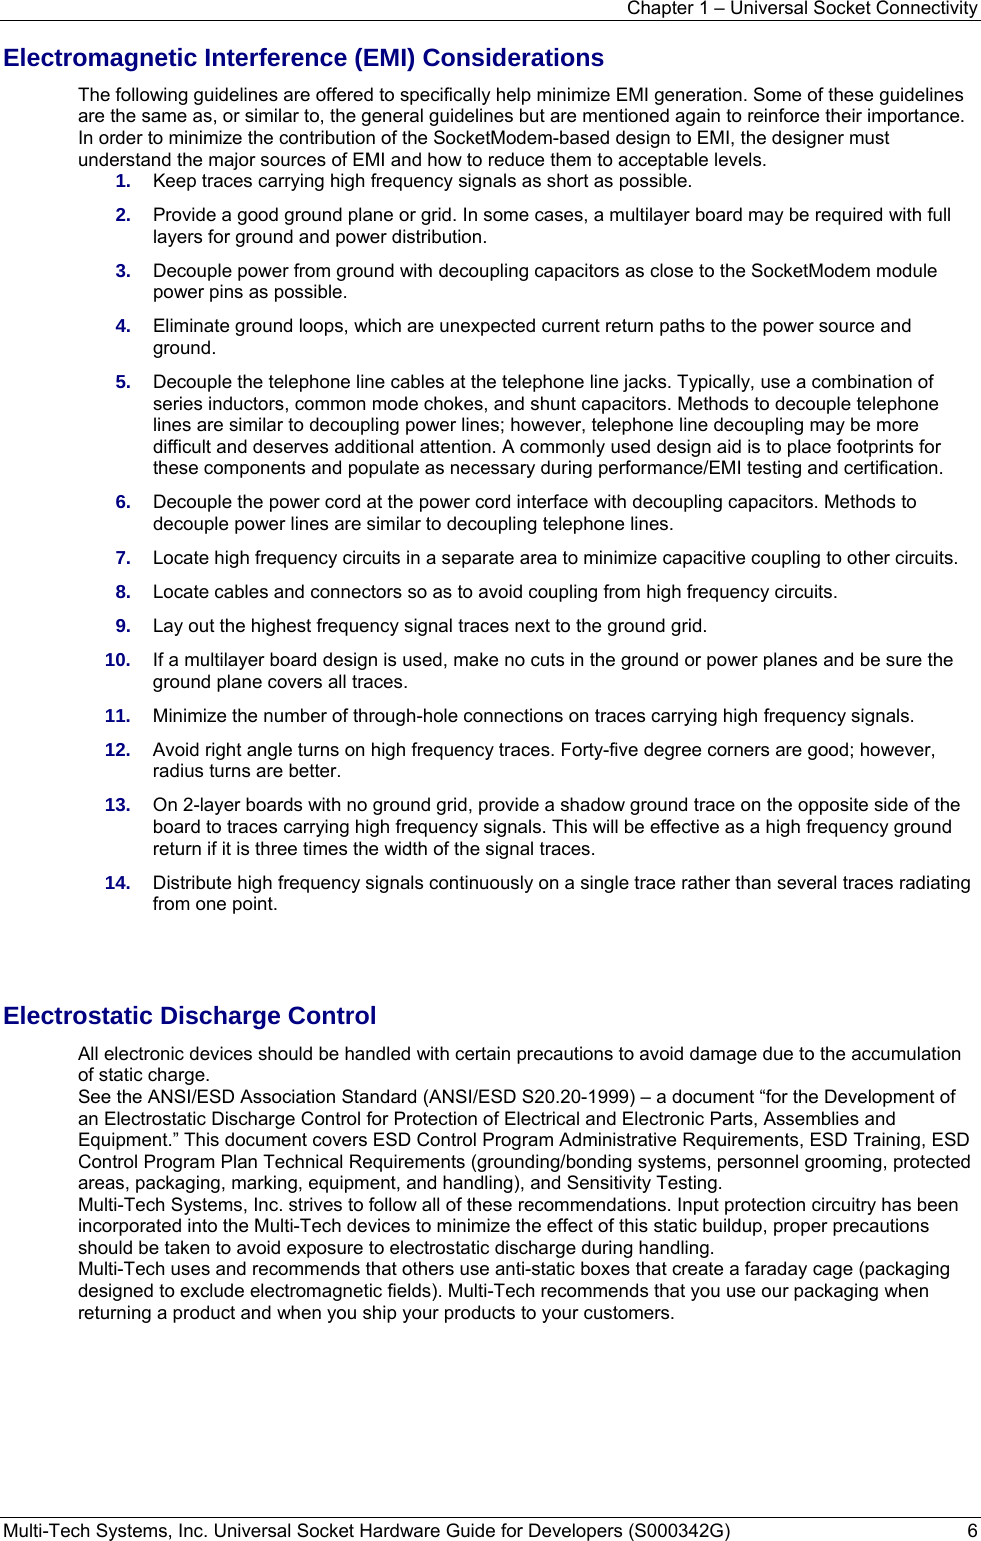 Chapter 1 – Universal Socket Connectivity Multi-Tech Systems, Inc. Universal Socket Hardware Guide for Developers (S000342G)  6  Electromagnetic Interference (EMI) Considerations The following guidelines are offered to specifically help minimize EMI generation. Some of these guidelines are the same as, or similar to, the general guidelines but are mentioned again to reinforce their importance. In order to minimize the contribution of the SocketModem-based design to EMI, the designer must understand the major sources of EMI and how to reduce them to acceptable levels.  1.  Keep traces carrying high frequency signals as short as possible. 2.  Provide a good ground plane or grid. In some cases, a multilayer board may be required with full layers for ground and power distribution. 3.  Decouple power from ground with decoupling capacitors as close to the SocketModem module power pins as possible. 4.  Eliminate ground loops, which are unexpected current return paths to the power source and ground. 5.  Decouple the telephone line cables at the telephone line jacks. Typically, use a combination of series inductors, common mode chokes, and shunt capacitors. Methods to decouple telephone lines are similar to decoupling power lines; however, telephone line decoupling may be more difficult and deserves additional attention. A commonly used design aid is to place footprints for these components and populate as necessary during performance/EMI testing and certification. 6.  Decouple the power cord at the power cord interface with decoupling capacitors. Methods to decouple power lines are similar to decoupling telephone lines. 7.  Locate high frequency circuits in a separate area to minimize capacitive coupling to other circuits. 8.  Locate cables and connectors so as to avoid coupling from high frequency circuits. 9.  Lay out the highest frequency signal traces next to the ground grid. 10.  If a multilayer board design is used, make no cuts in the ground or power planes and be sure the ground plane covers all traces. 11.  Minimize the number of through-hole connections on traces carrying high frequency signals. 12.  Avoid right angle turns on high frequency traces. Forty-five degree corners are good; however, radius turns are better. 13.  On 2-layer boards with no ground grid, provide a shadow ground trace on the opposite side of the board to traces carrying high frequency signals. This will be effective as a high frequency ground return if it is three times the width of the signal traces. 14.  Distribute high frequency signals continuously on a single trace rather than several traces radiating from one point.   Electrostatic Discharge Control All electronic devices should be handled with certain precautions to avoid damage due to the accumulation of static charge.  See the ANSI/ESD Association Standard (ANSI/ESD S20.20-1999) – a document “for the Development of an Electrostatic Discharge Control for Protection of Electrical and Electronic Parts, Assemblies and Equipment.” This document covers ESD Control Program Administrative Requirements, ESD Training, ESD Control Program Plan Technical Requirements (grounding/bonding systems, personnel grooming, protected areas, packaging, marking, equipment, and handling), and Sensitivity Testing. Multi-Tech Systems, Inc. strives to follow all of these recommendations. Input protection circuitry has been incorporated into the Multi-Tech devices to minimize the effect of this static buildup, proper precautions should be taken to avoid exposure to electrostatic discharge during handling.  Multi-Tech uses and recommends that others use anti-static boxes that create a faraday cage (packaging designed to exclude electromagnetic fields). Multi-Tech recommends that you use our packaging when returning a product and when you ship your products to your customers. 